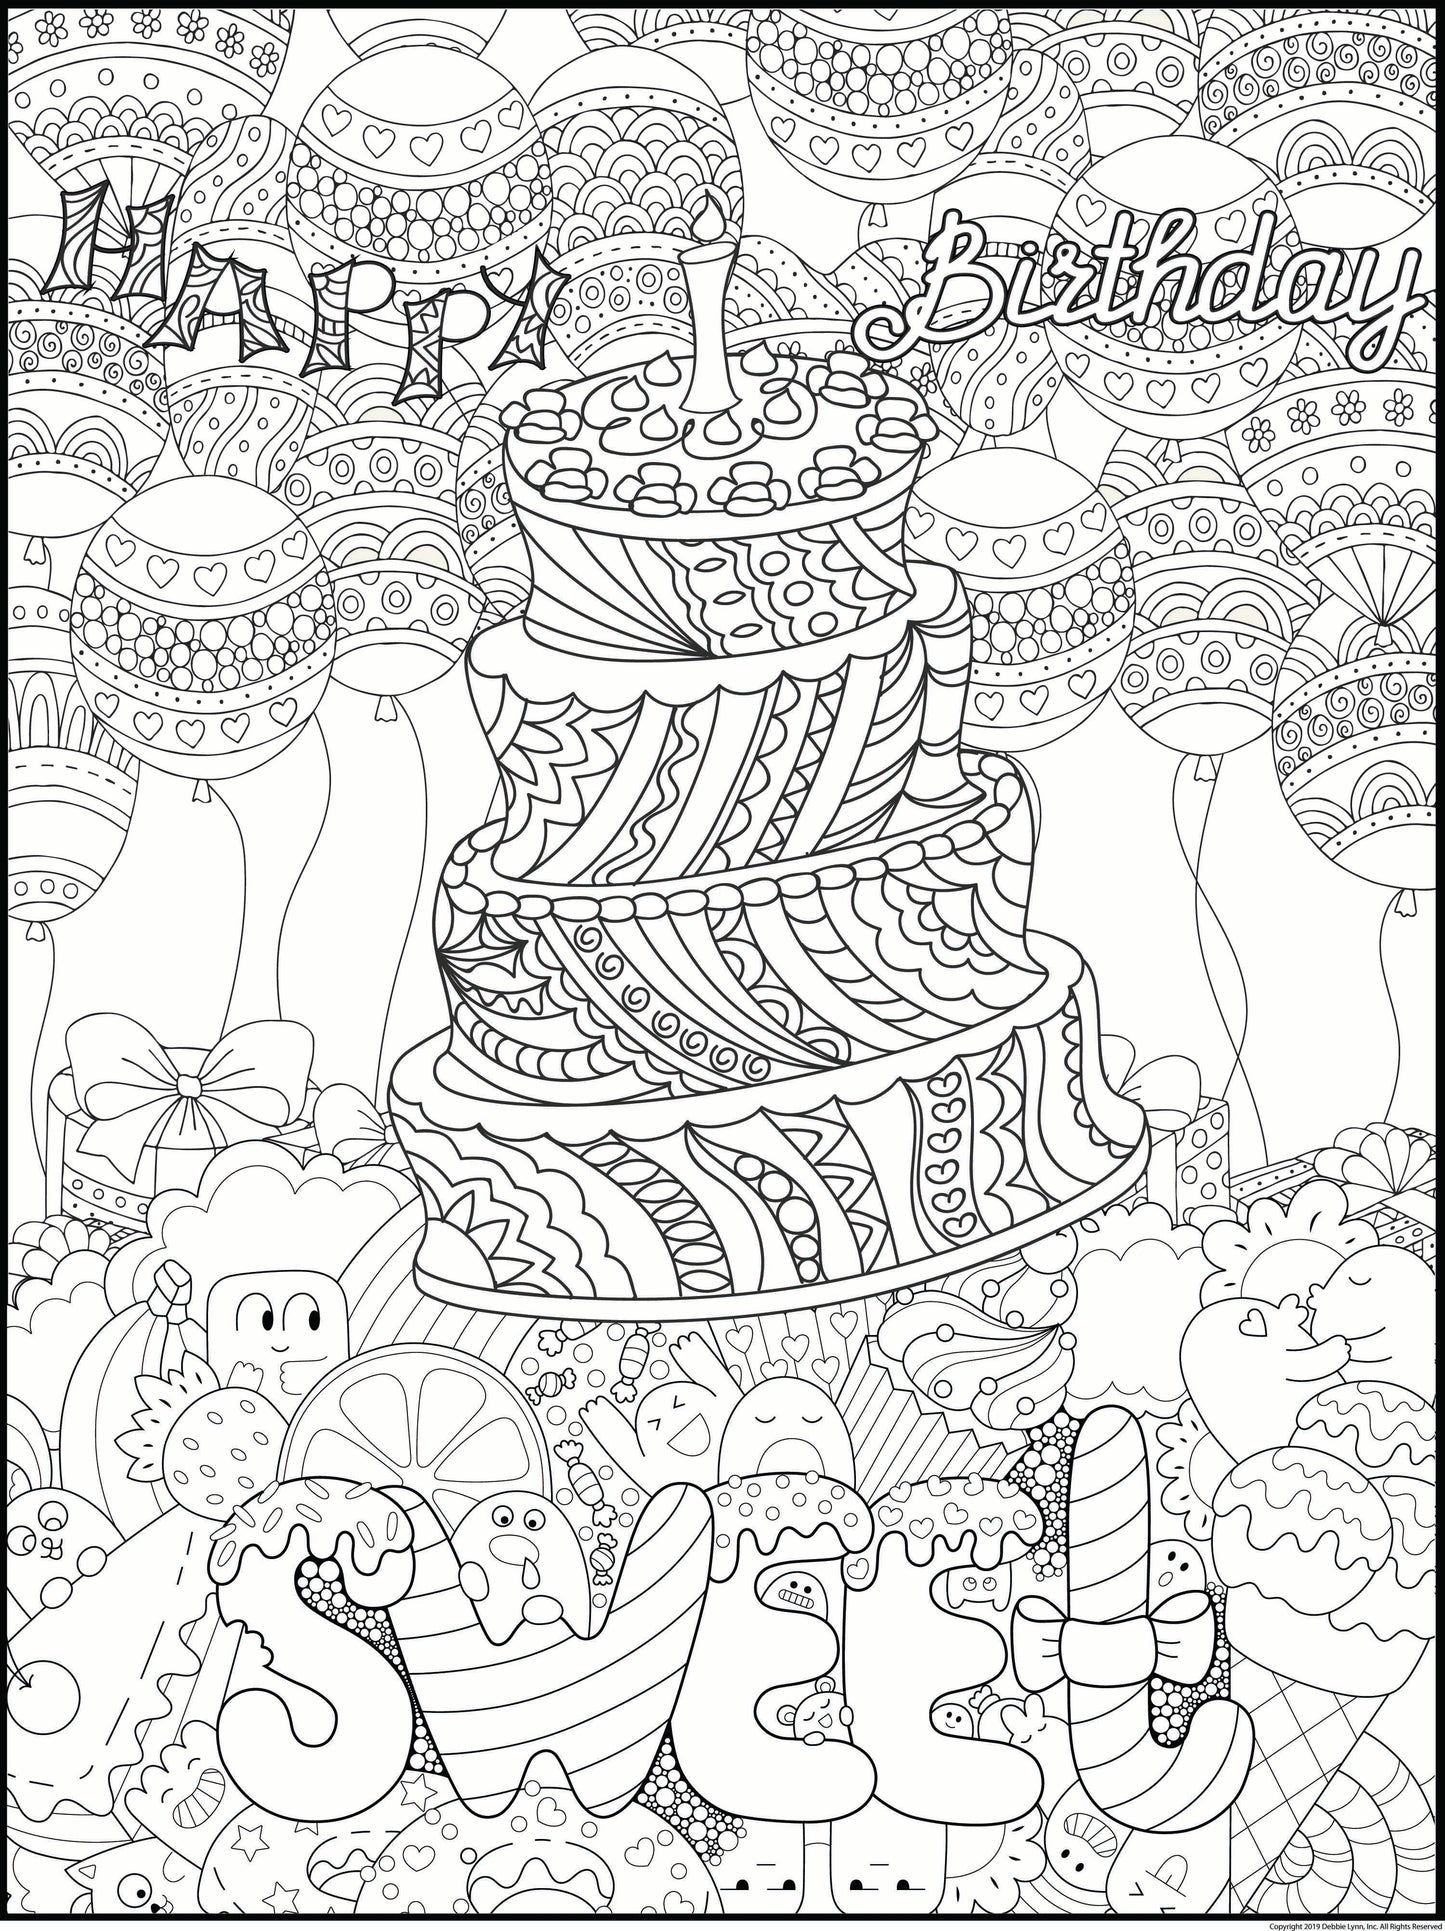 Happy Birthday Personalized Giant Coloring Poster  46"x60"